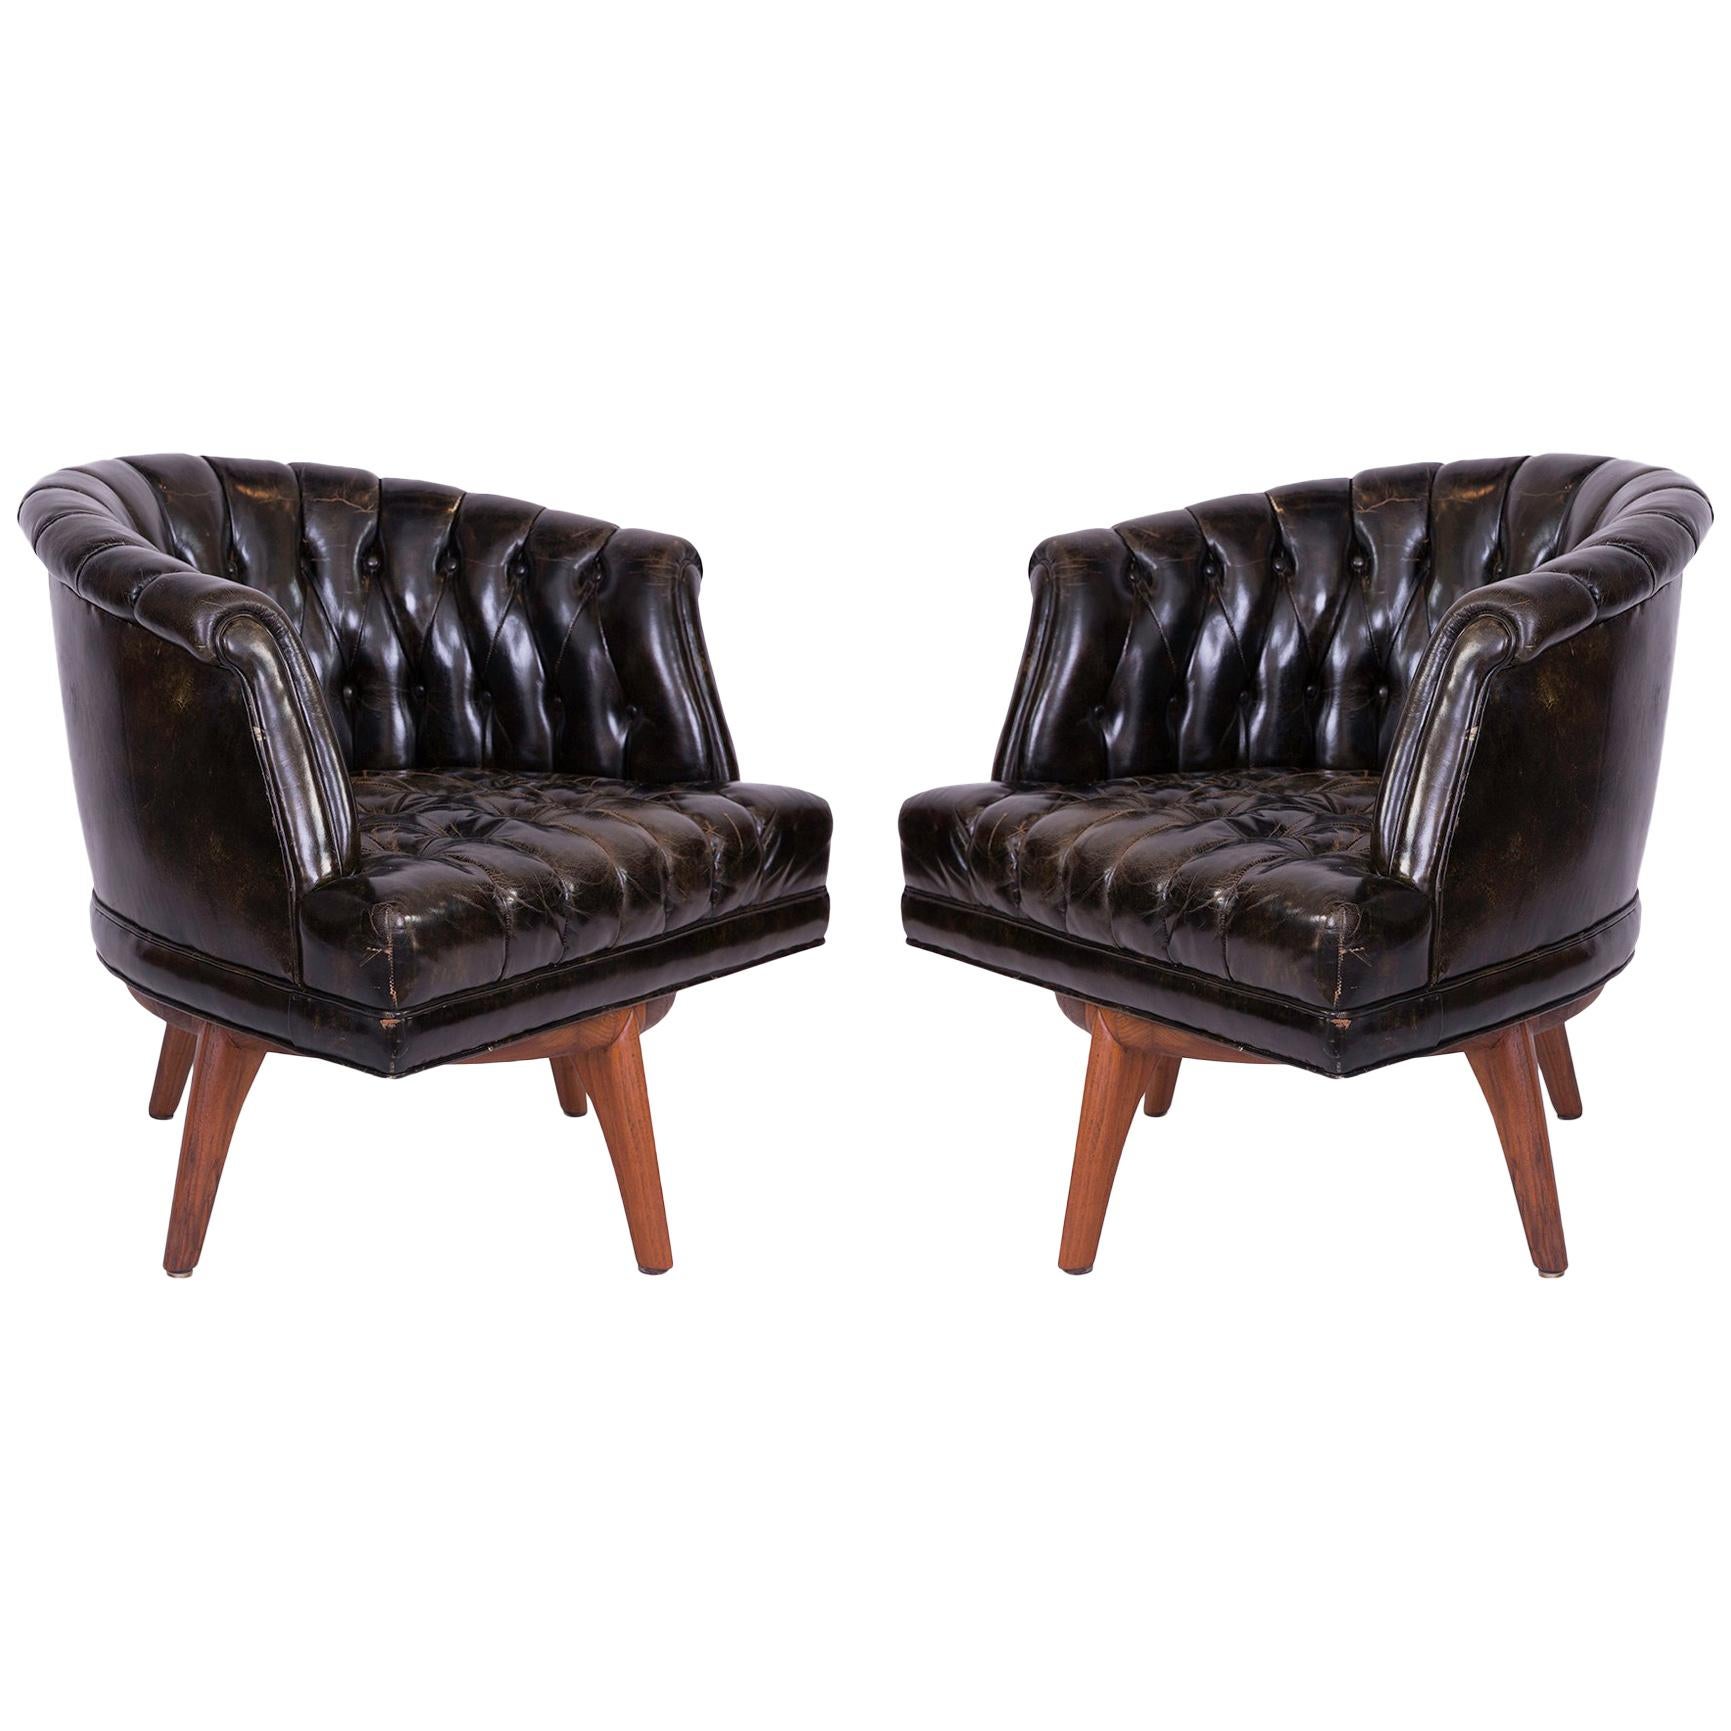 Monteverdi-Young African Walnut and Leather Swivel Lounge Chairs